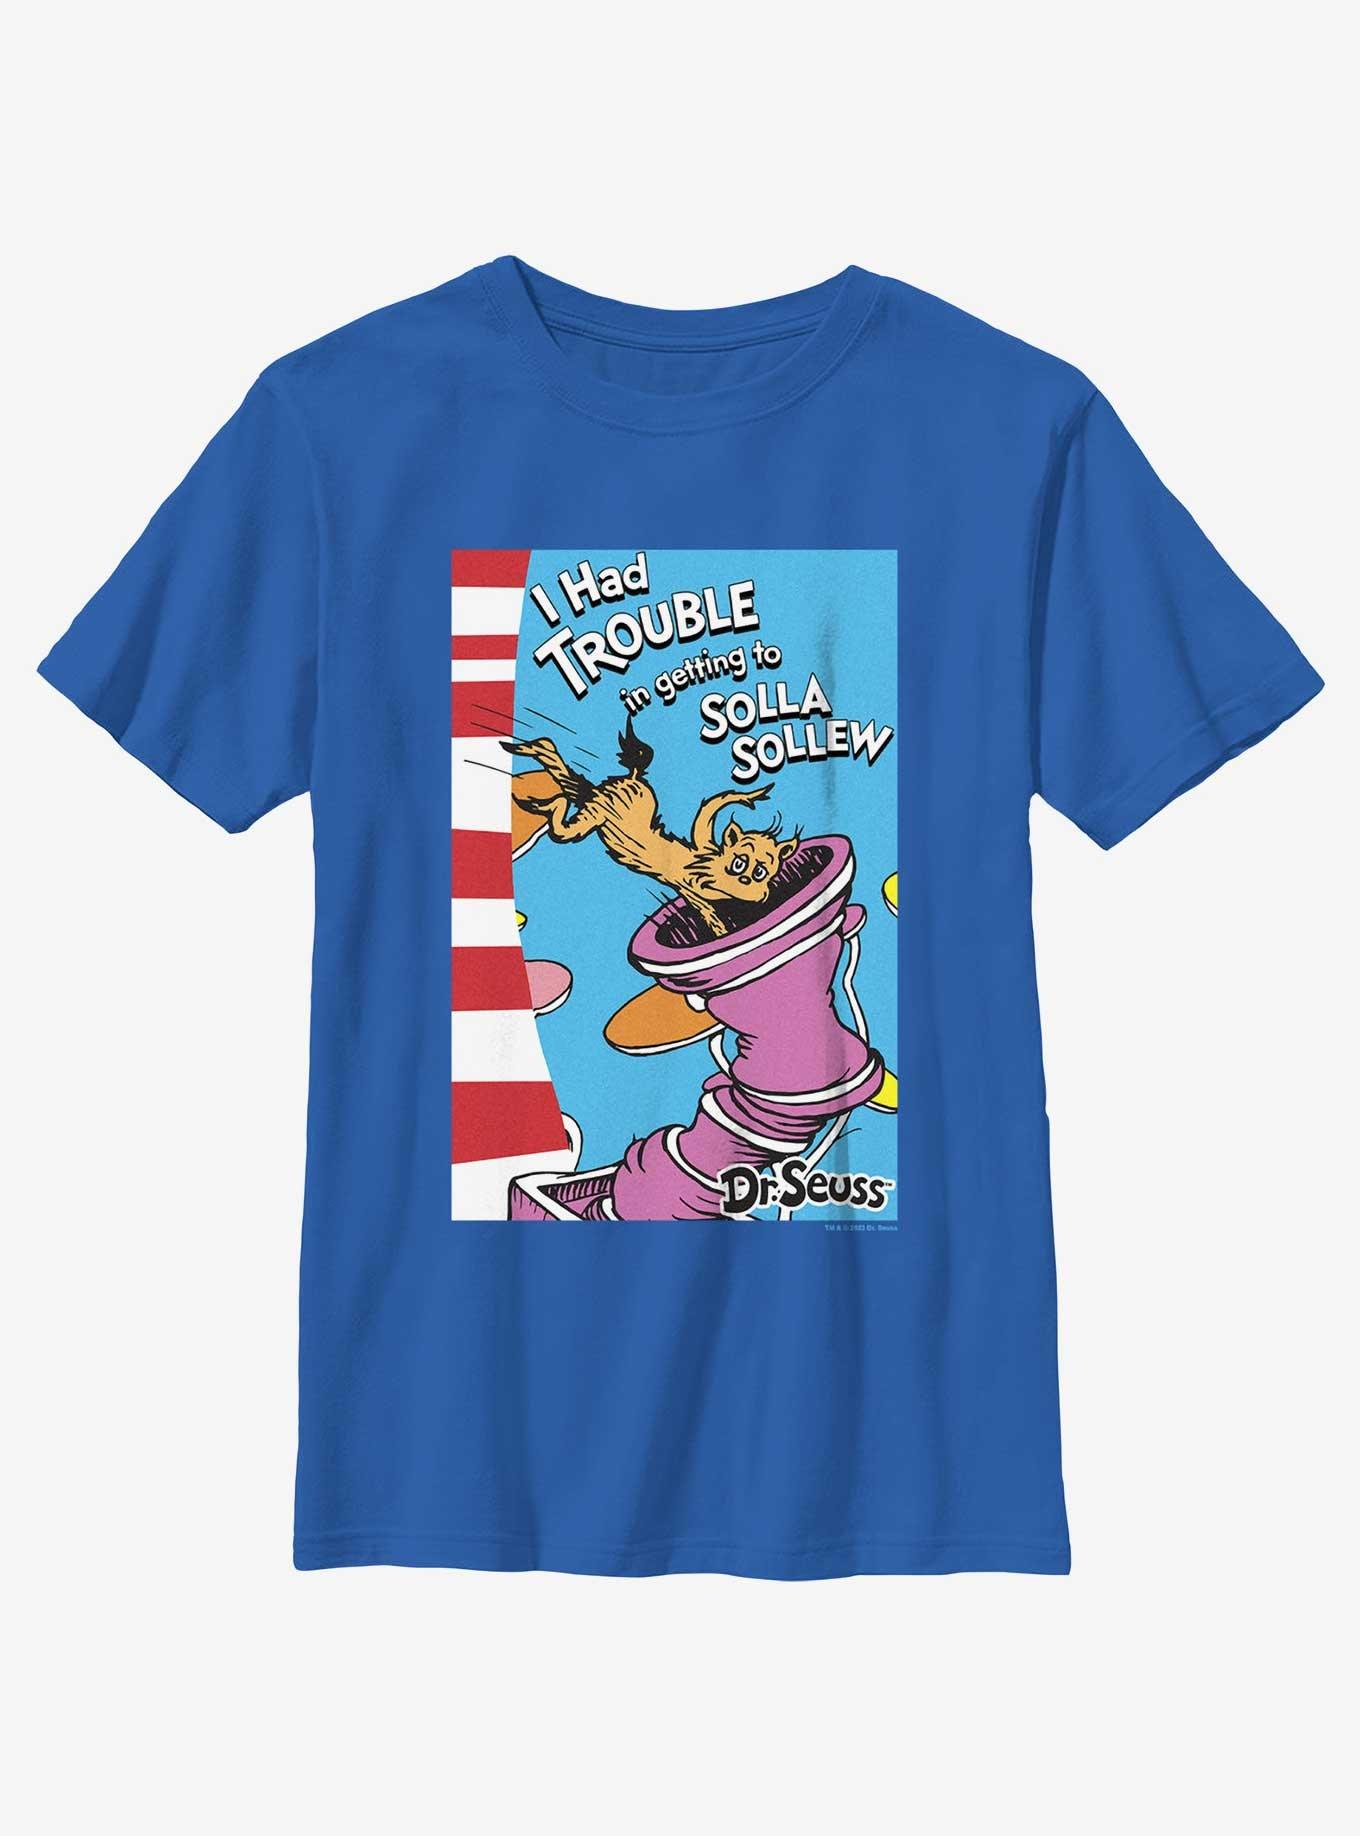 Dr. Seuss's I Had Trouble Getting Into Solla Sollew Cover Youth T-Shirt, ROYAL, hi-res